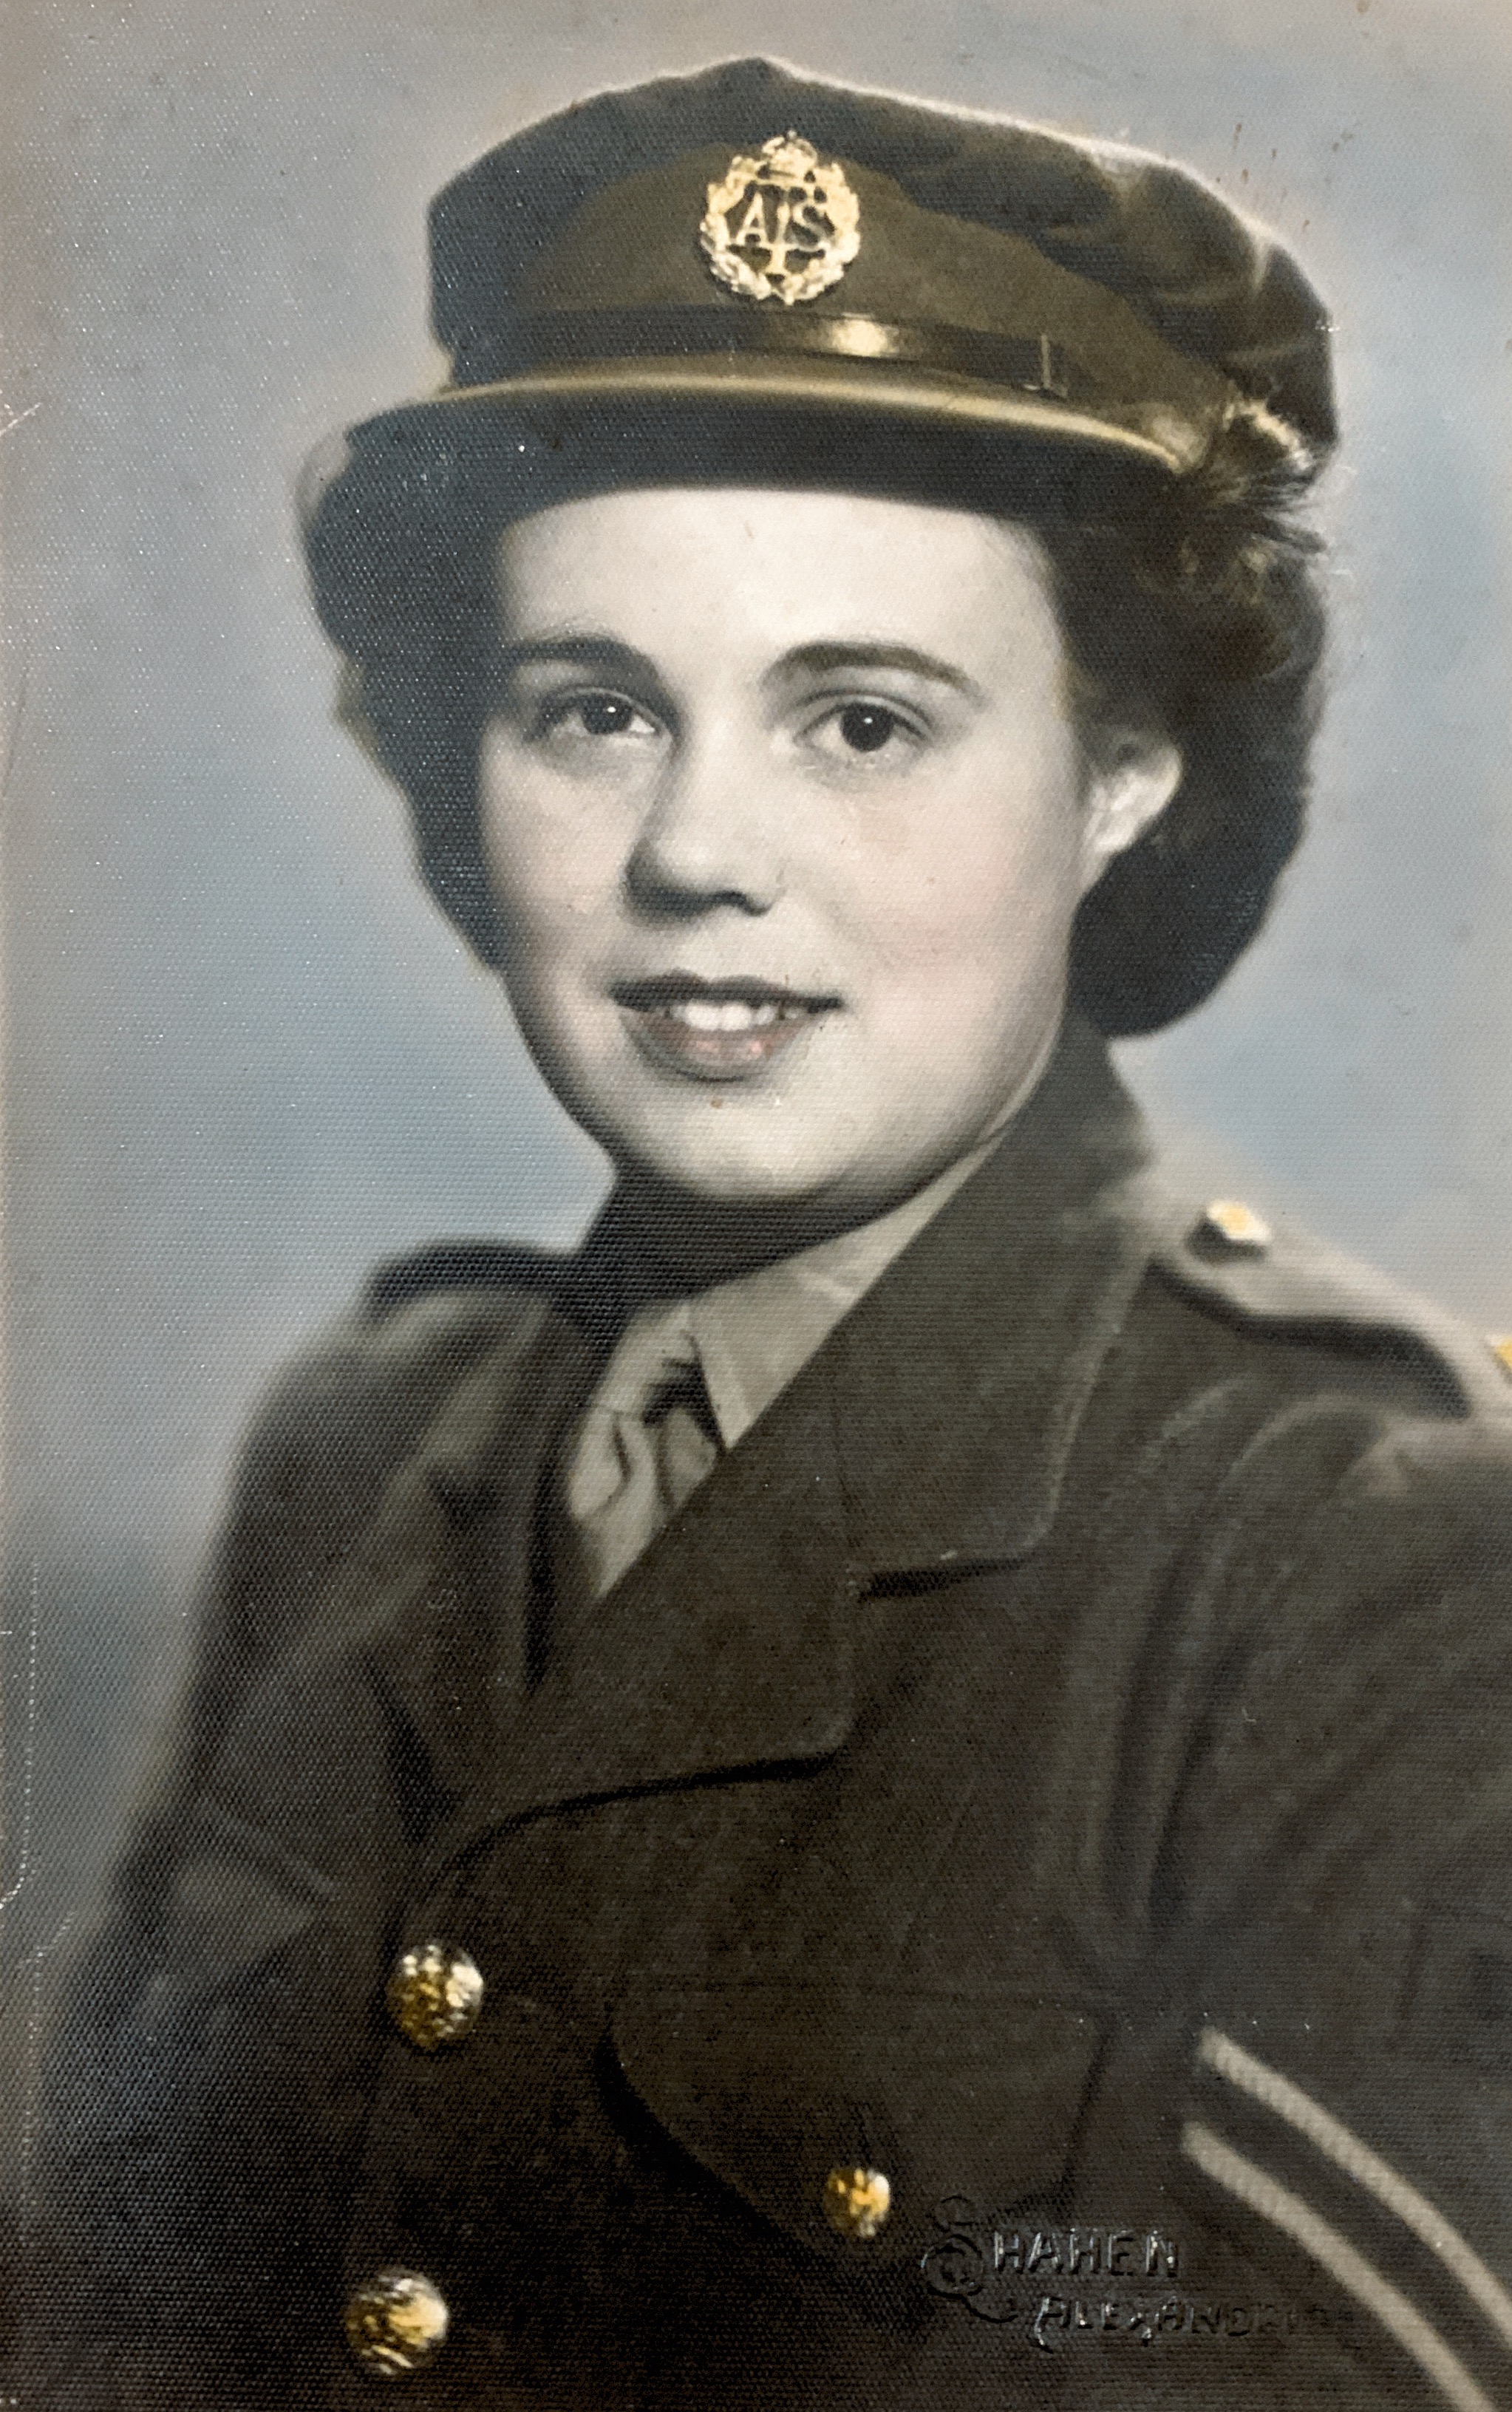 Muriel Dickons ATS approximate date 1944